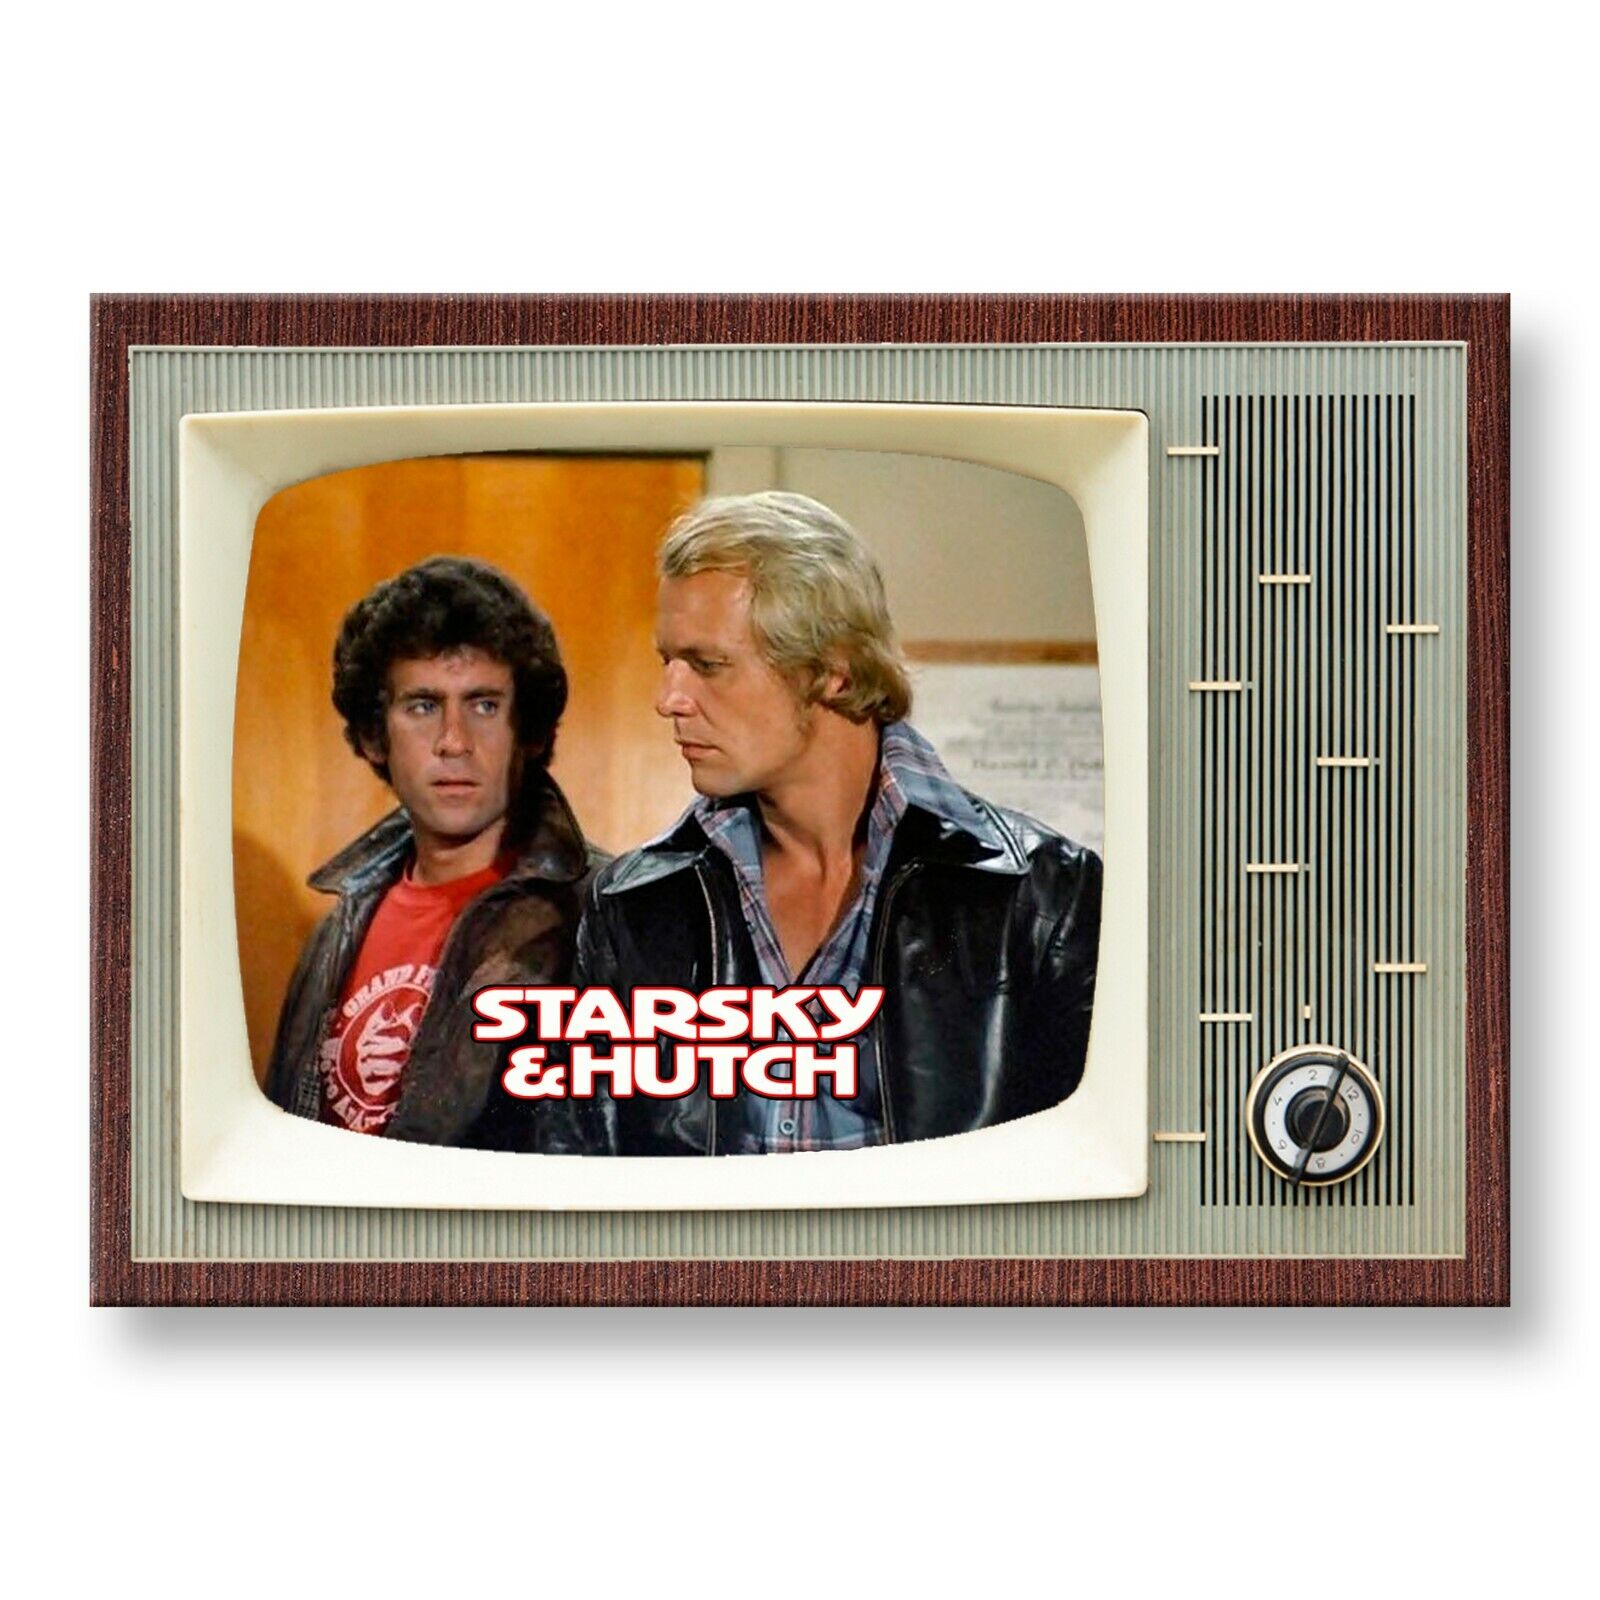 STARSKY AND HUTCH TV Show TV 3.5 inches x 2.5 inches Steel FRIDGE MAGNET